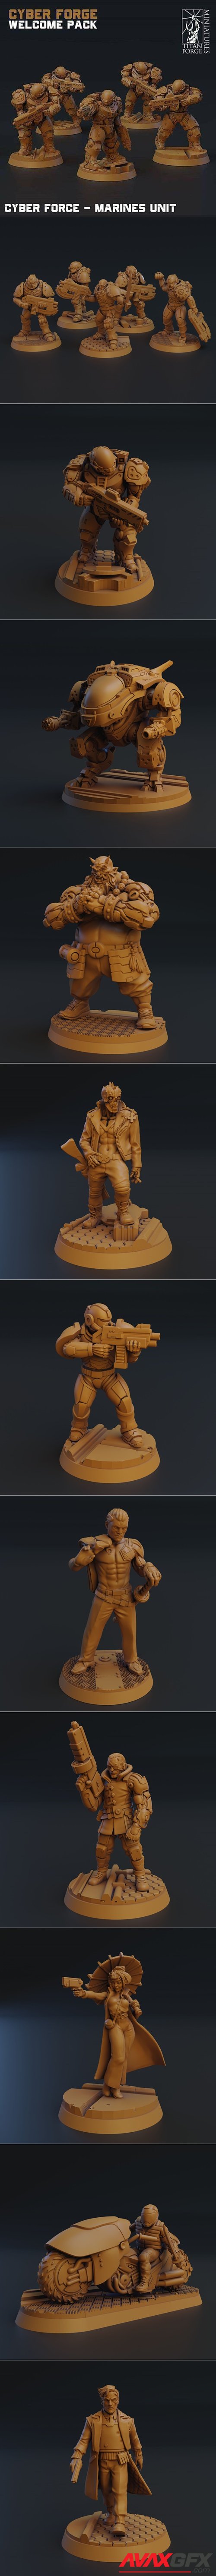 Titan Forge - Cyber Forge & Welcome Pack – 3D Printable STL